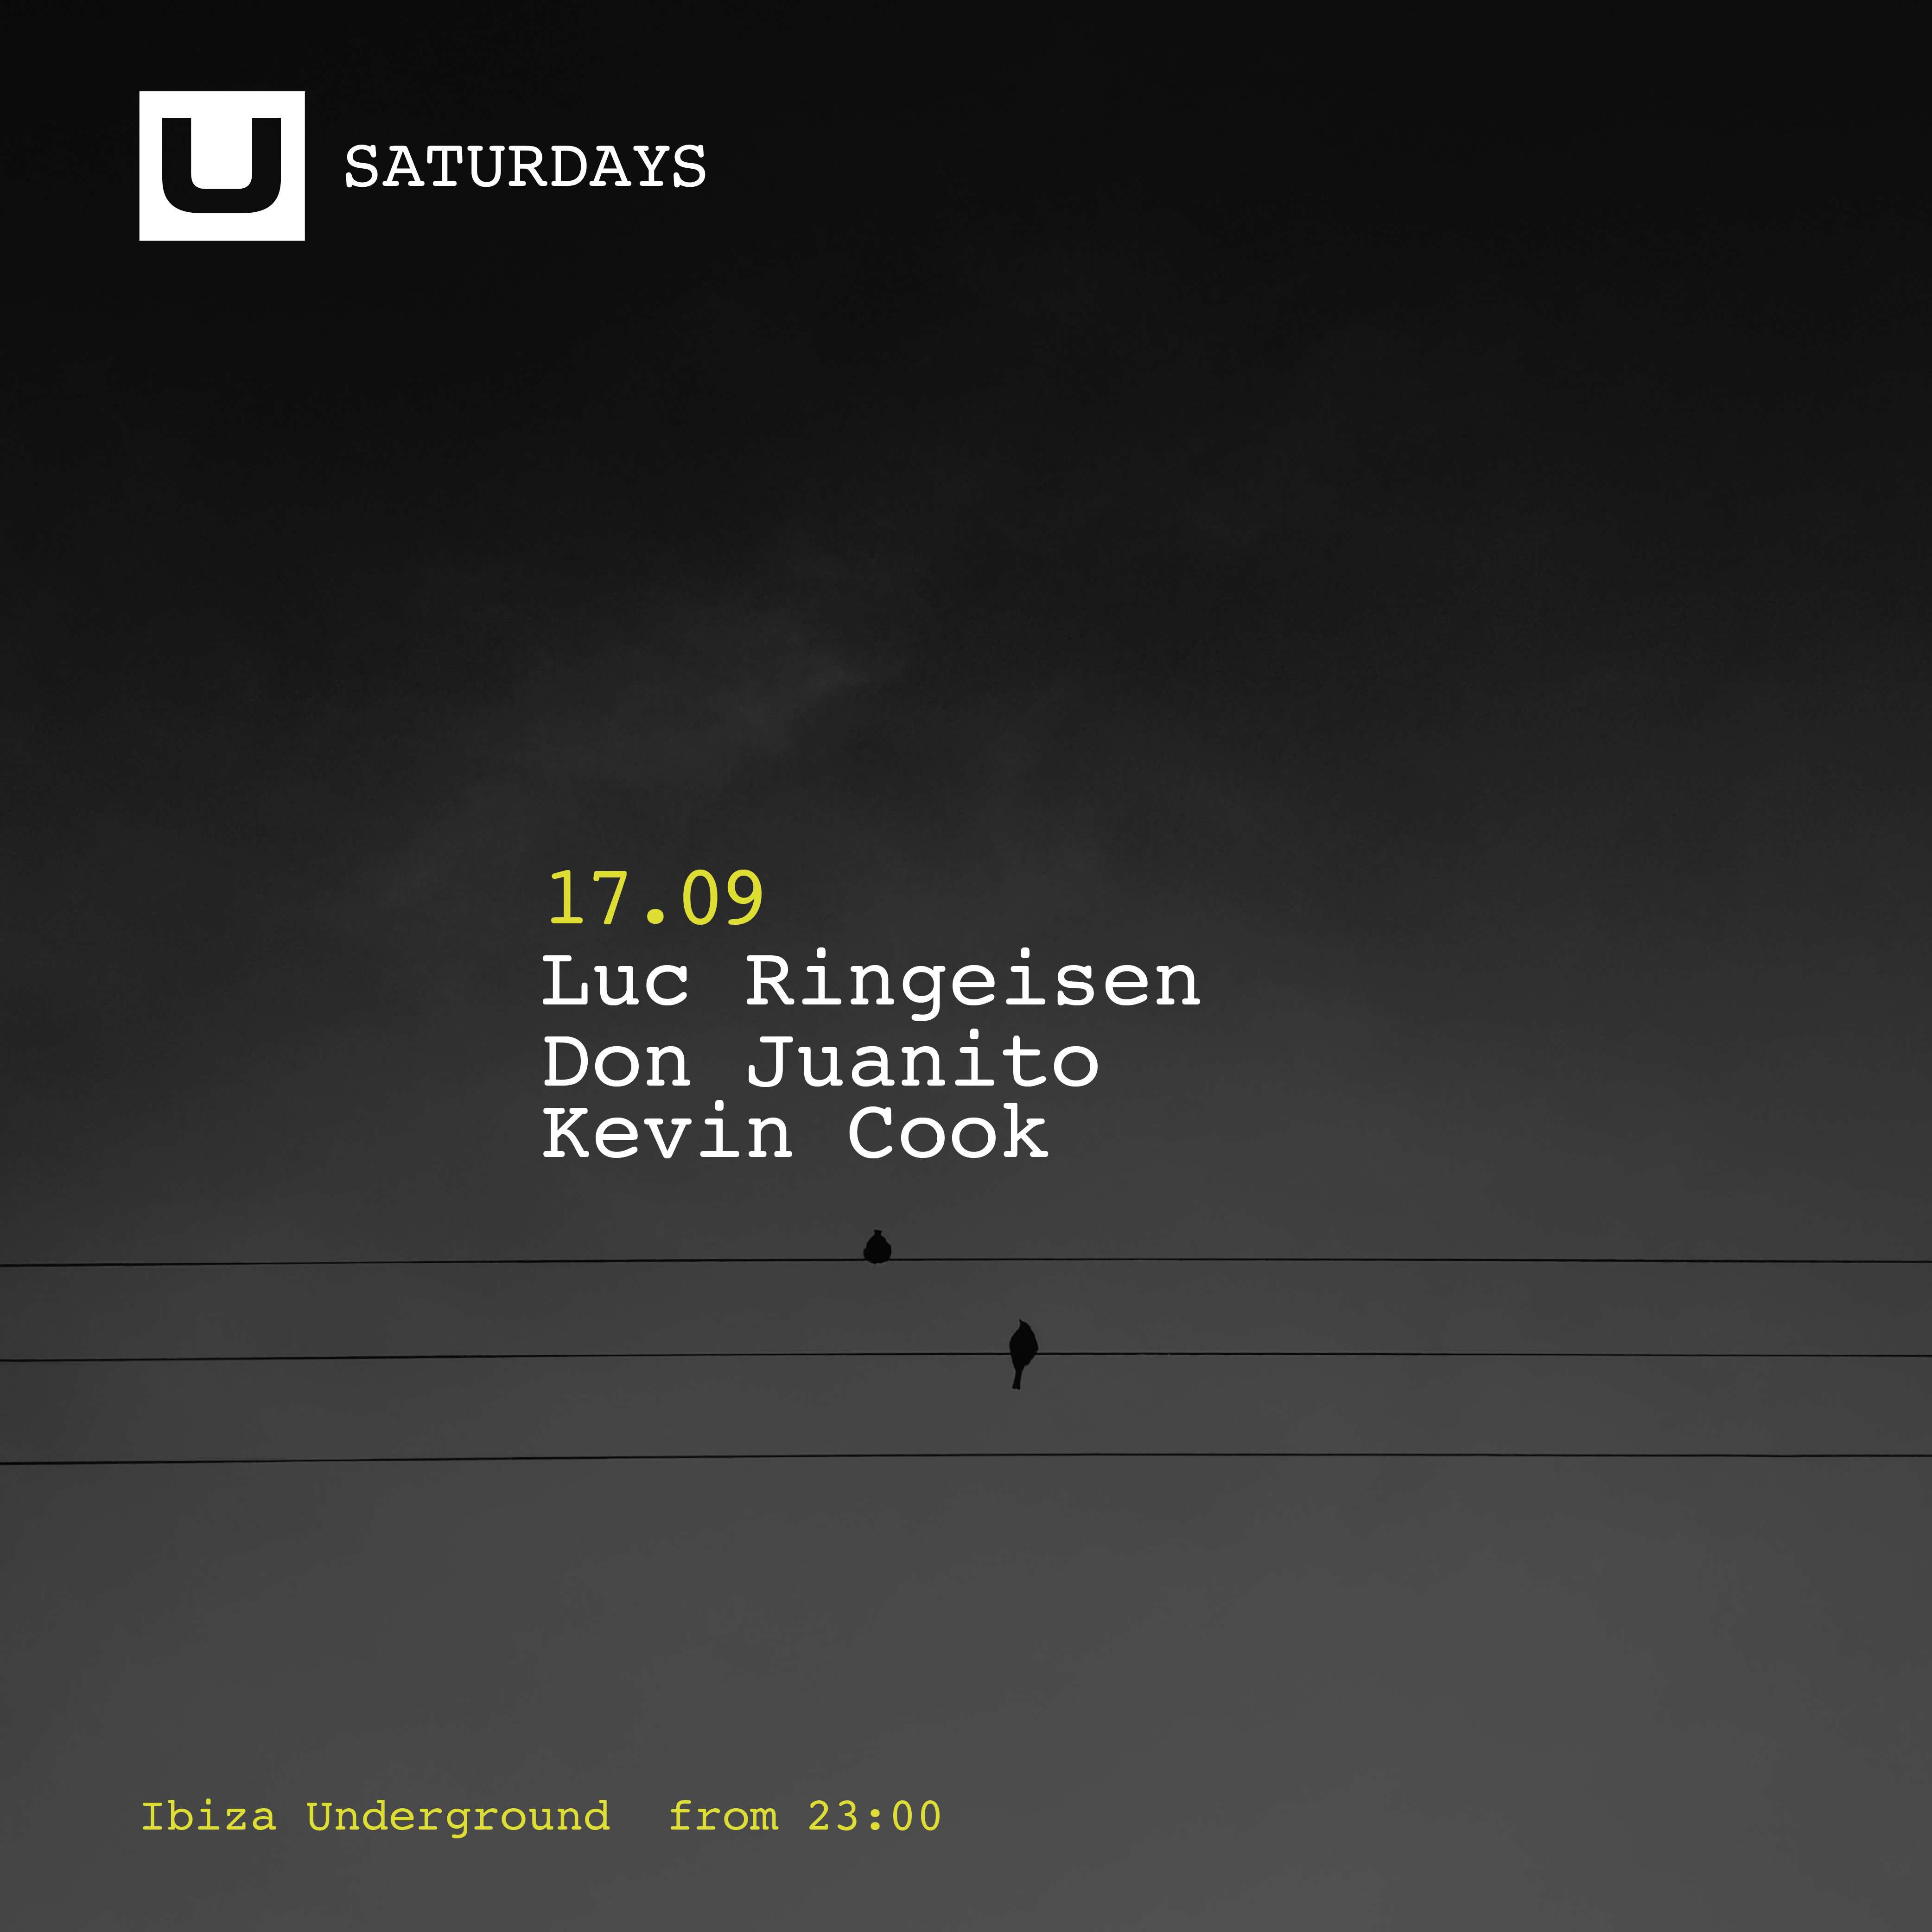 U Saturday with Luc Ringeisen, Don Juanito & Kevin Cook - フライヤー表